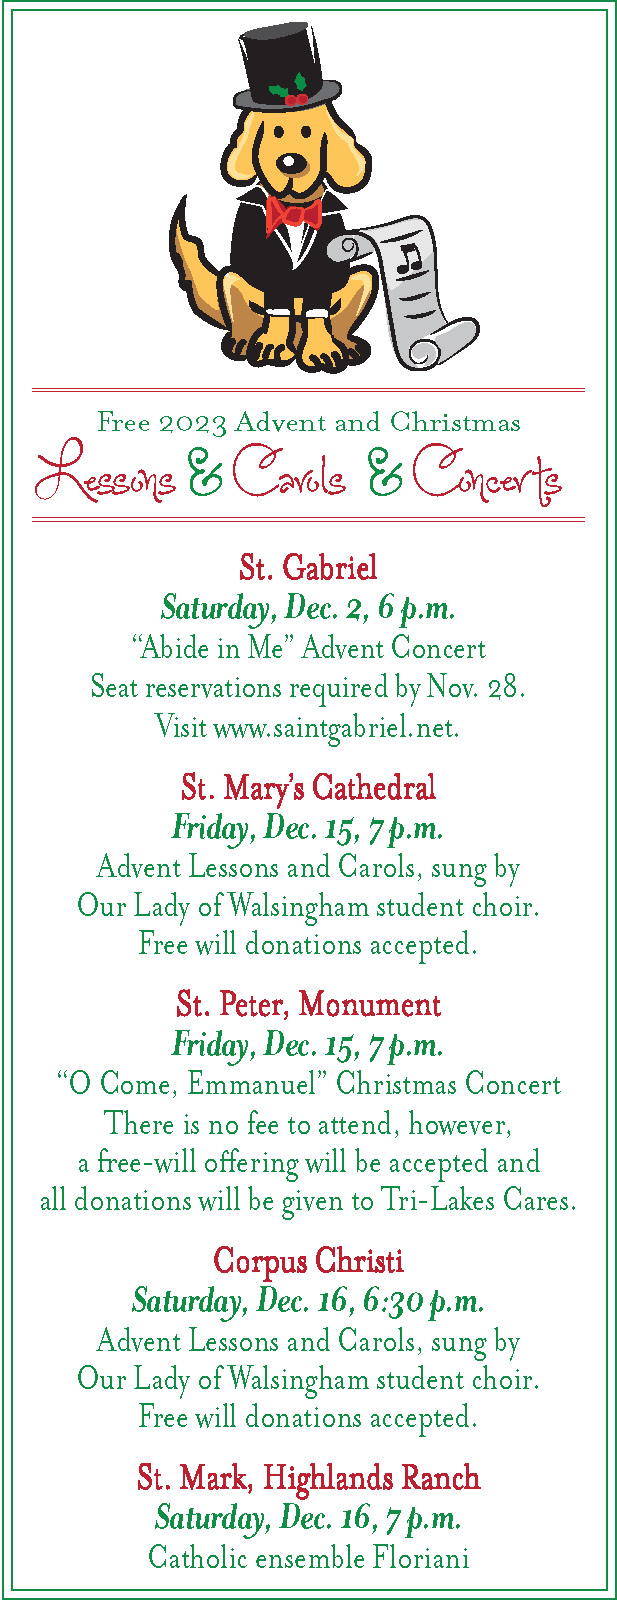 Free 2023 Advent and Christmas Lessons and Carols and Concerts